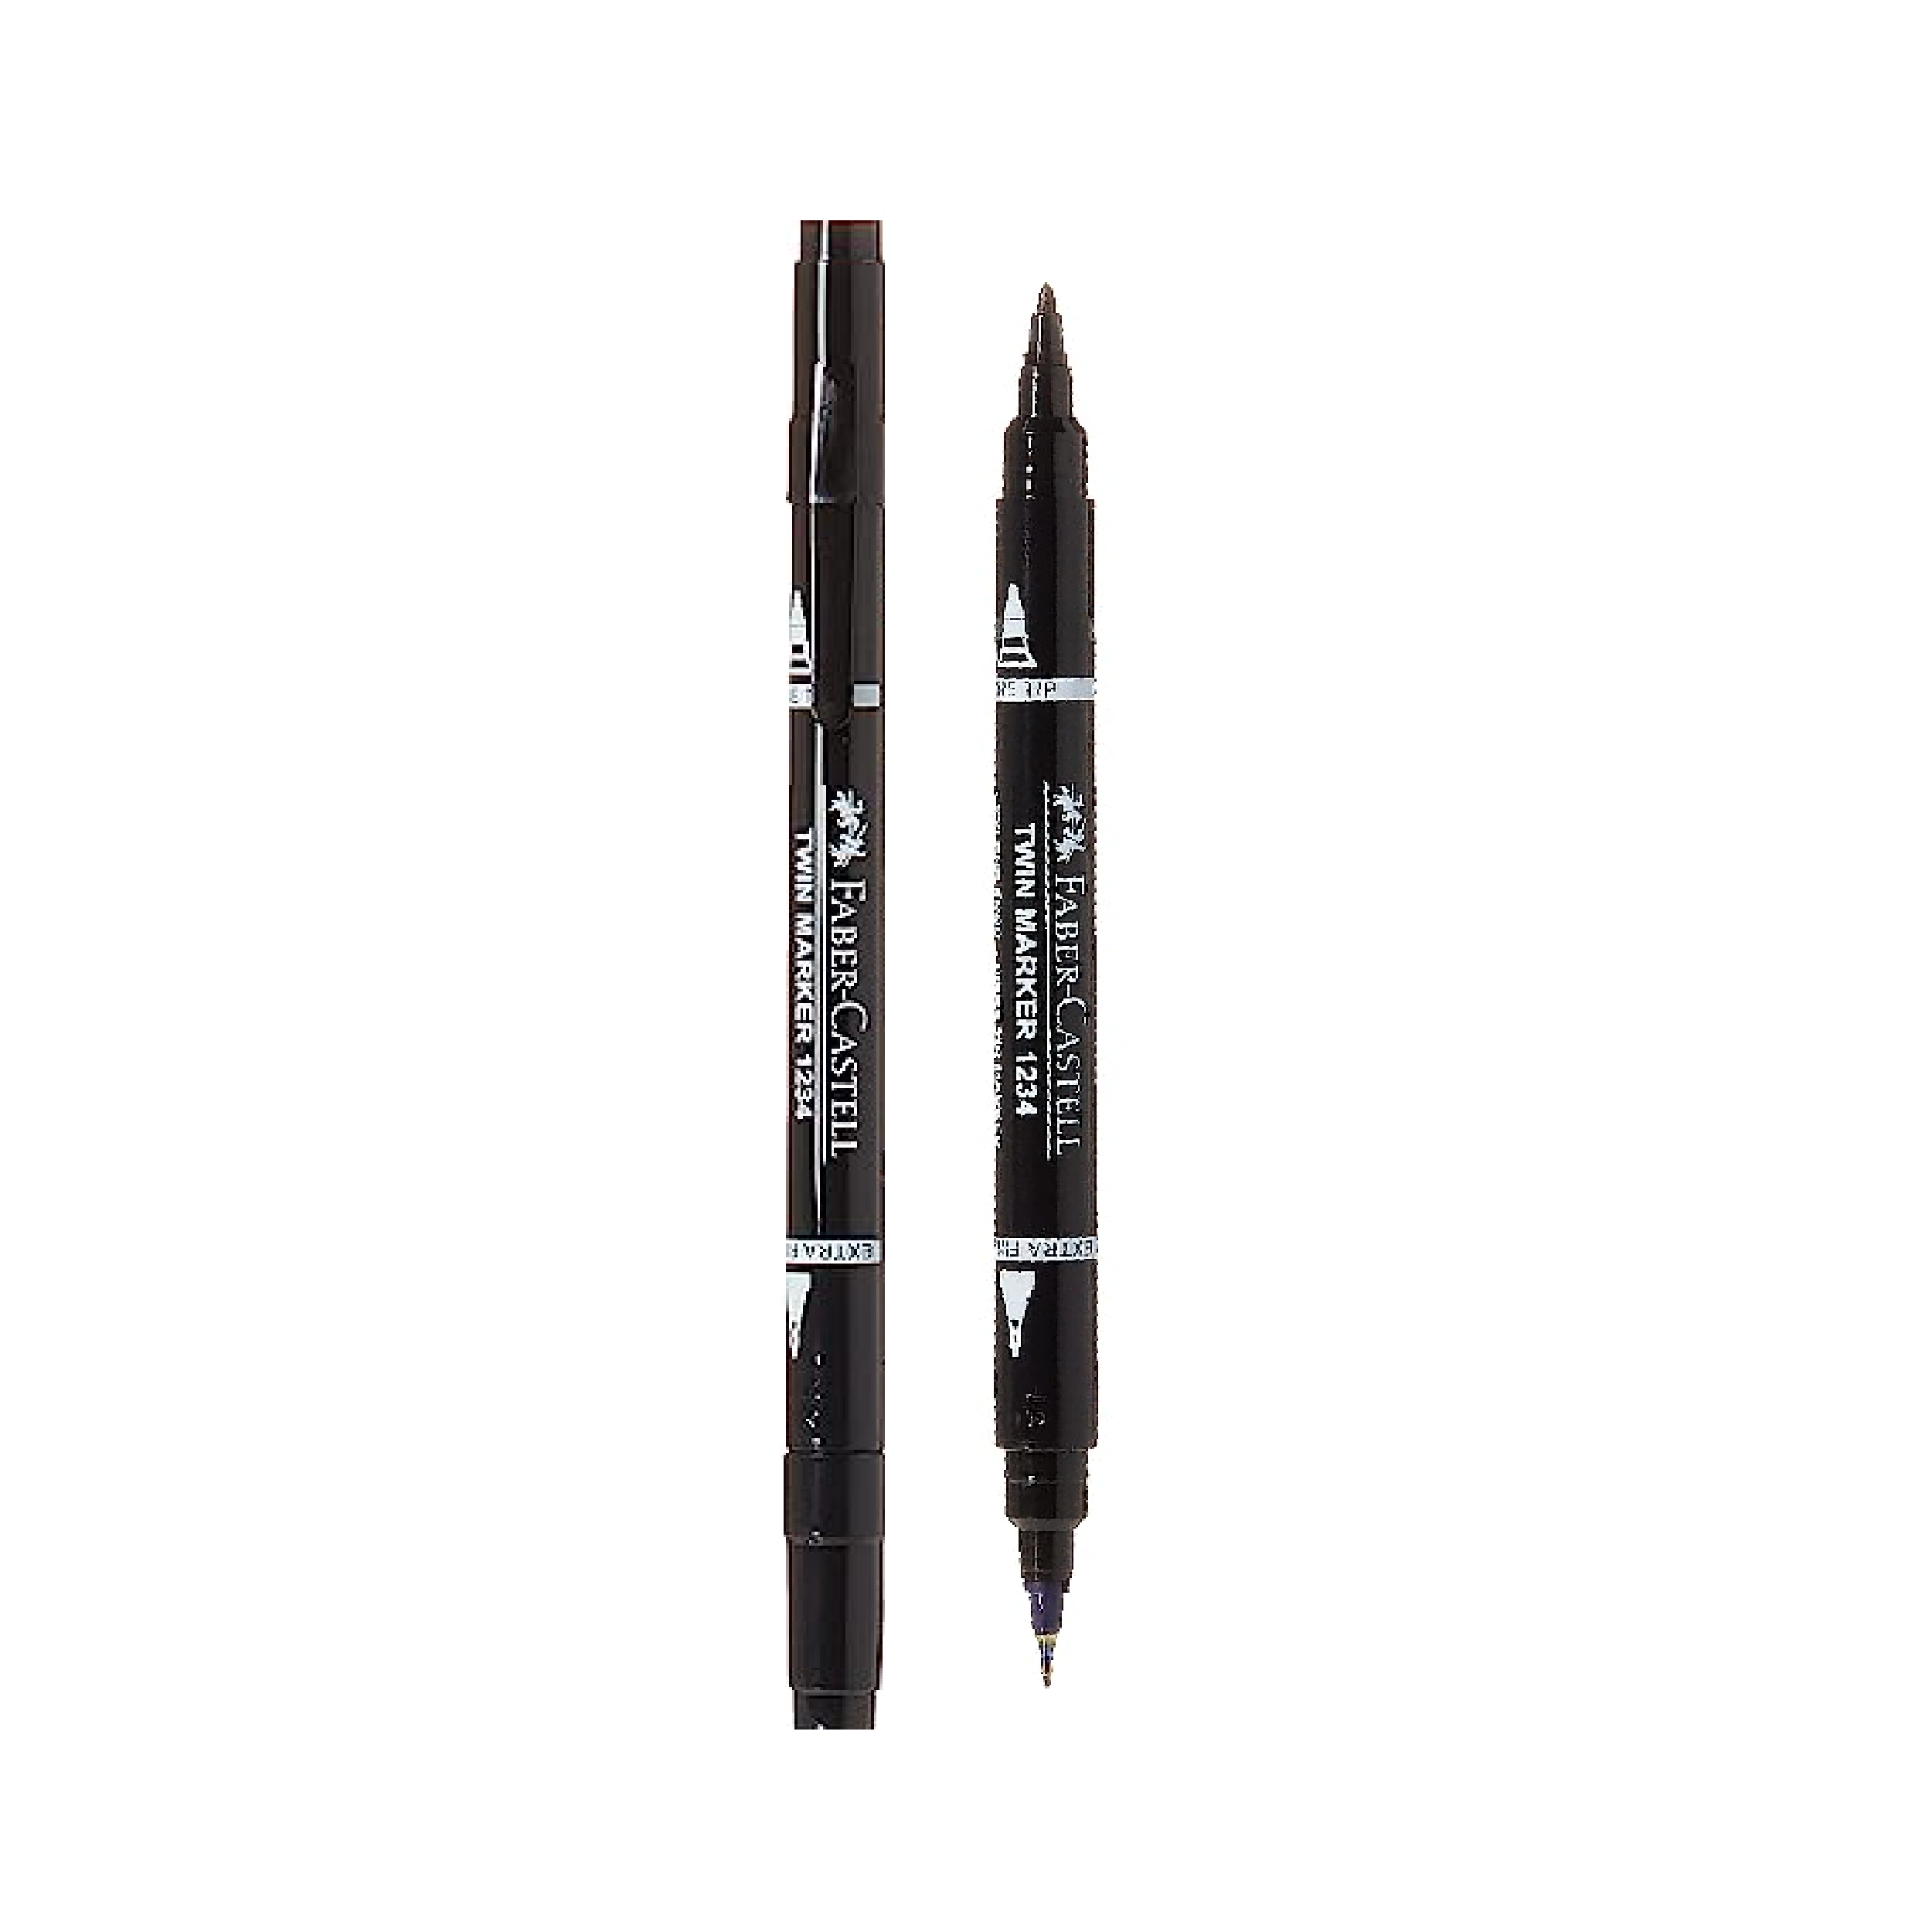 Faber-Castell Permanent Twin Marker, Twin Tip, Black (1234)